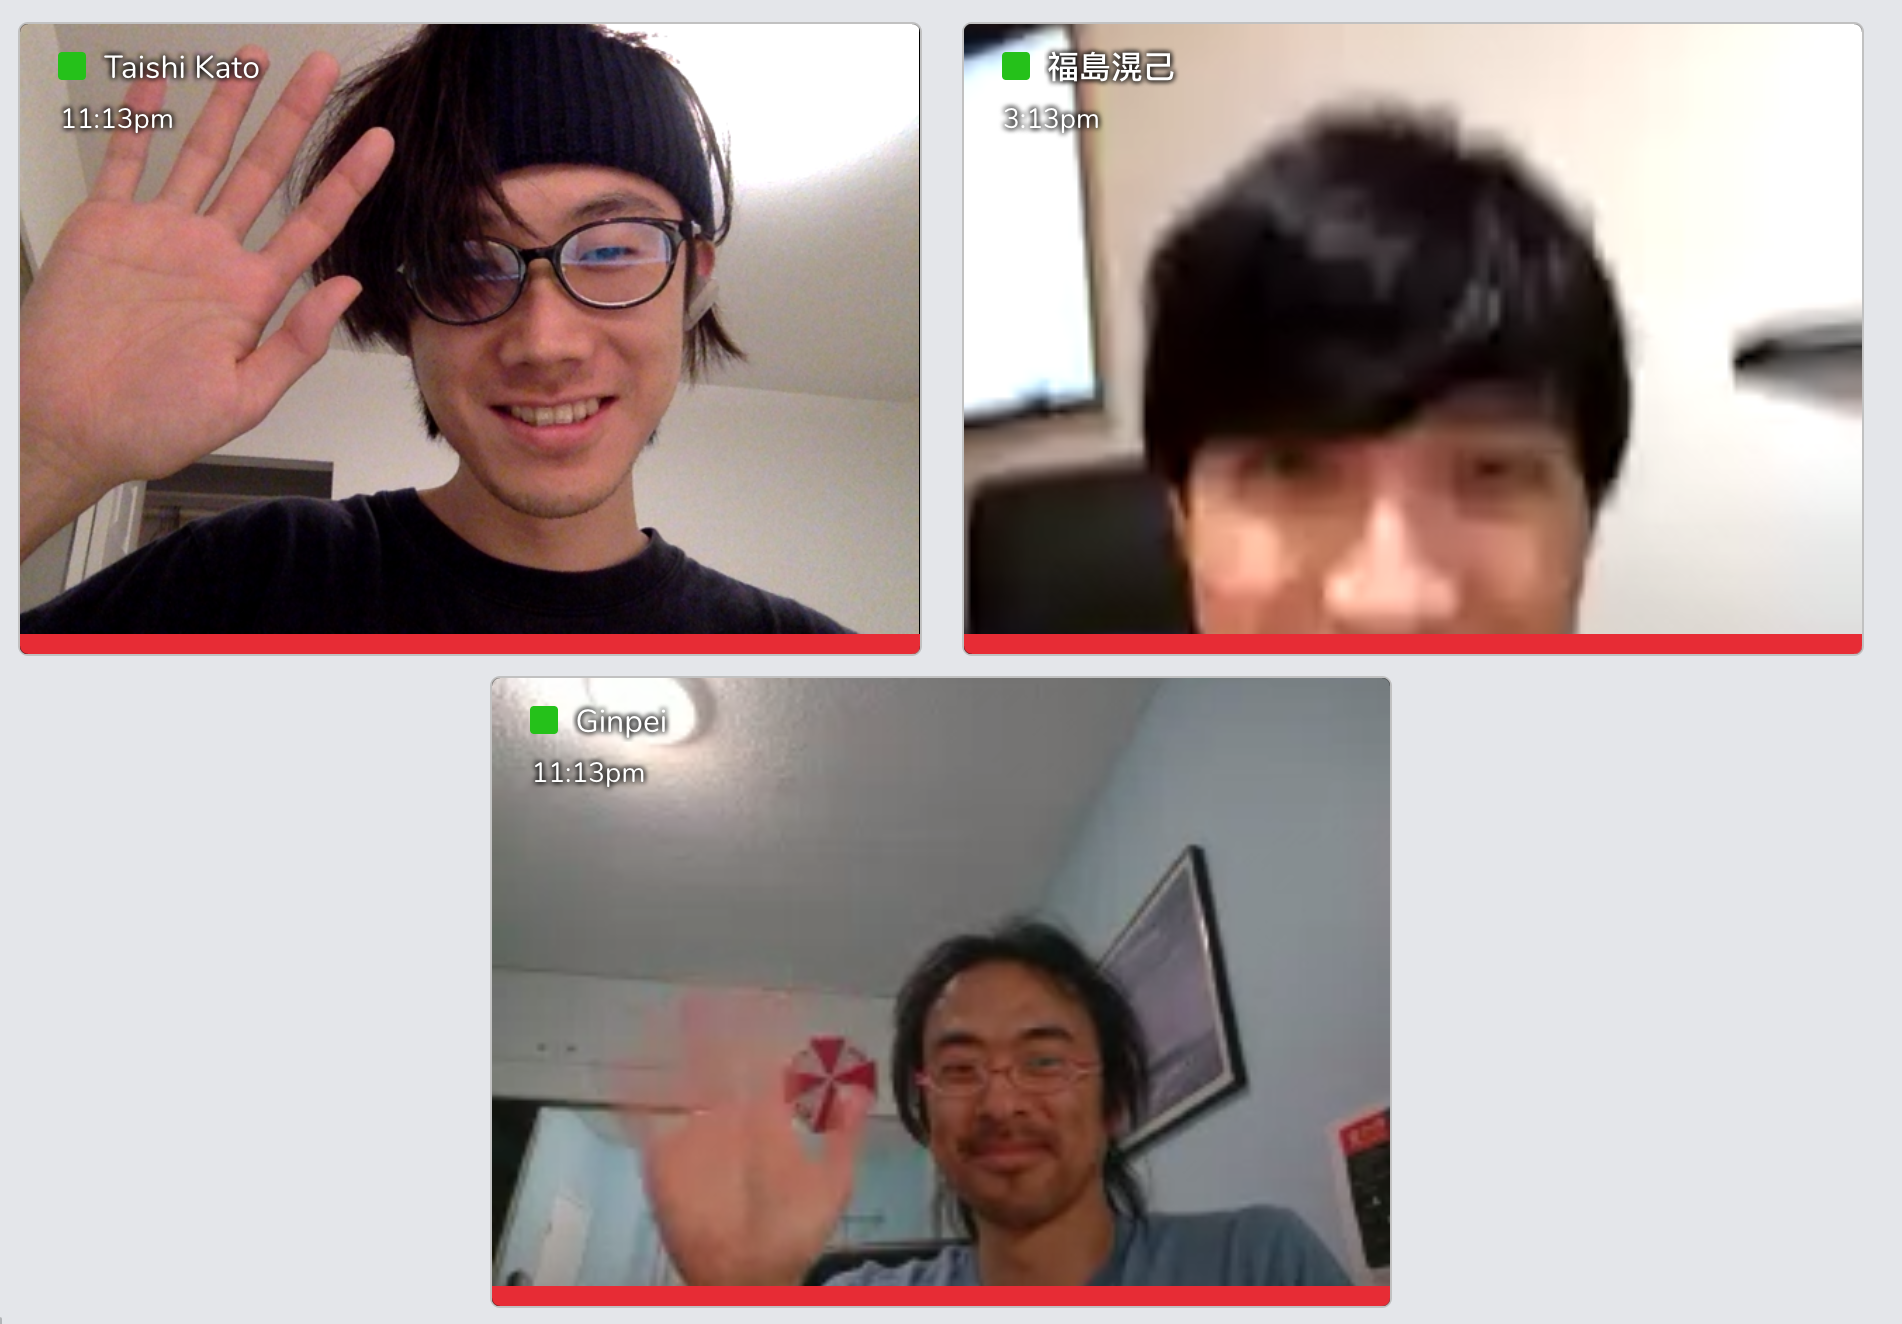 I had a late-night video chat with them. It was fun